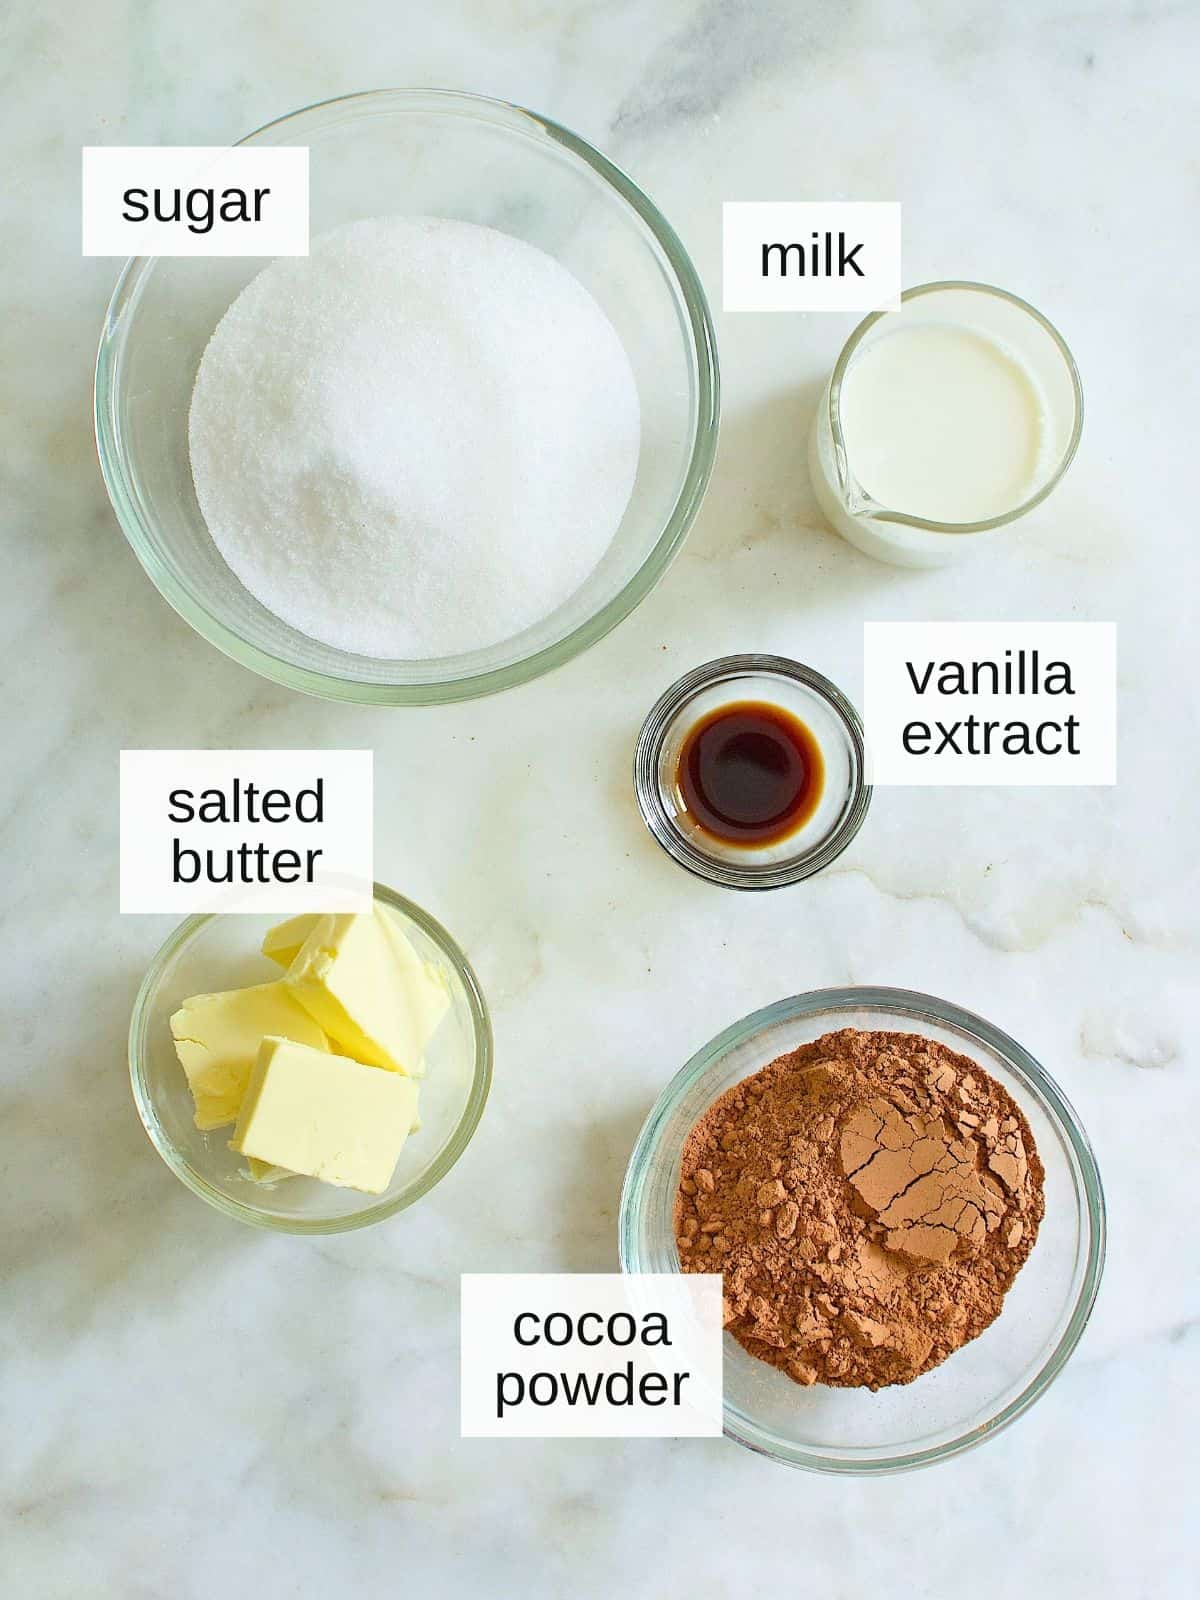 ingredients for hot fudge sauce, including sugar, milk, salted butter, vanilla extract, and cocoa powder.